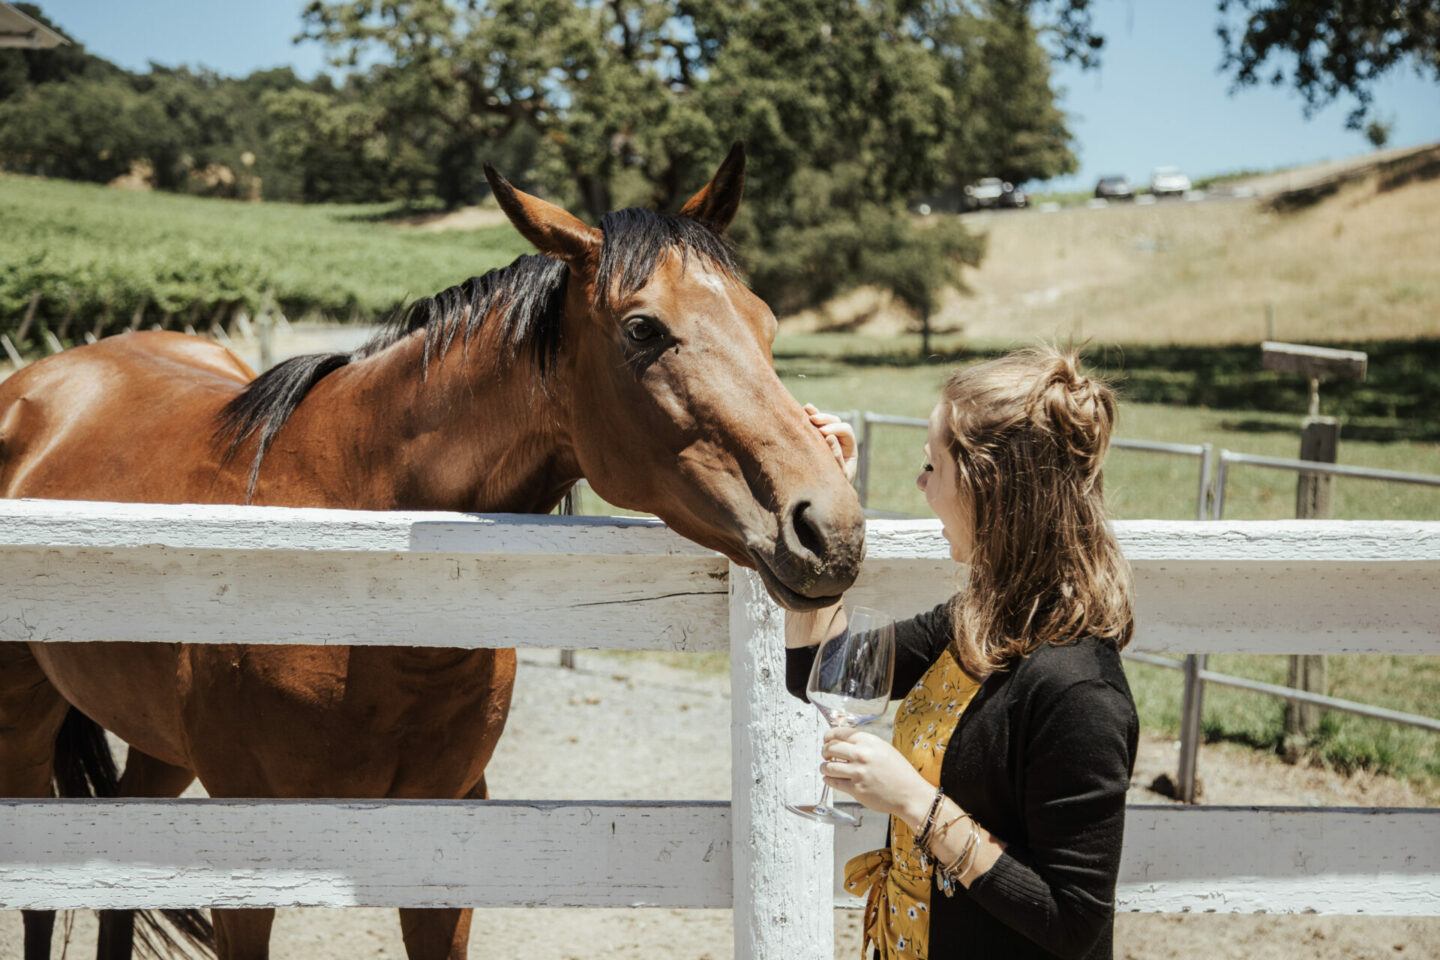 Woman petting a horse while drinking a glass of wine